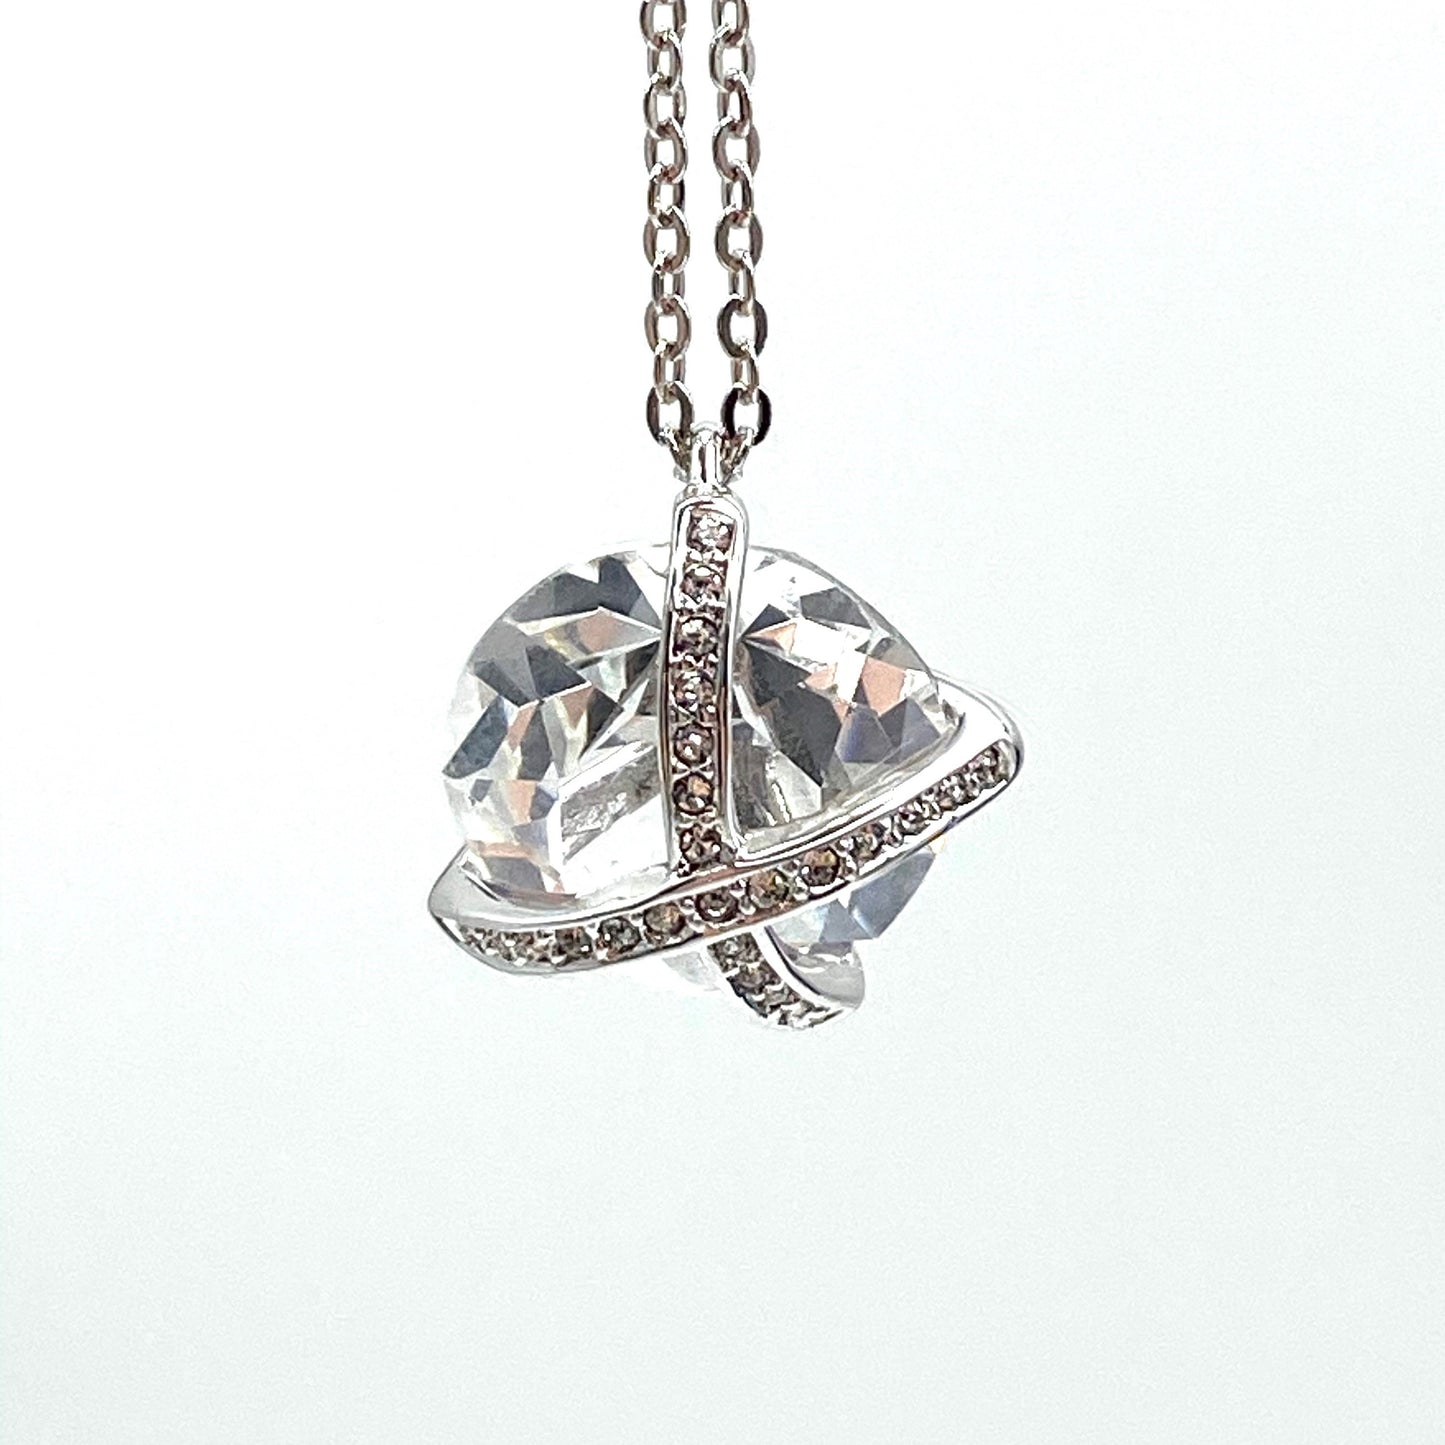 Signed Swarovski Caged Solitaire Crystal Pendant in Original Box and Packaging